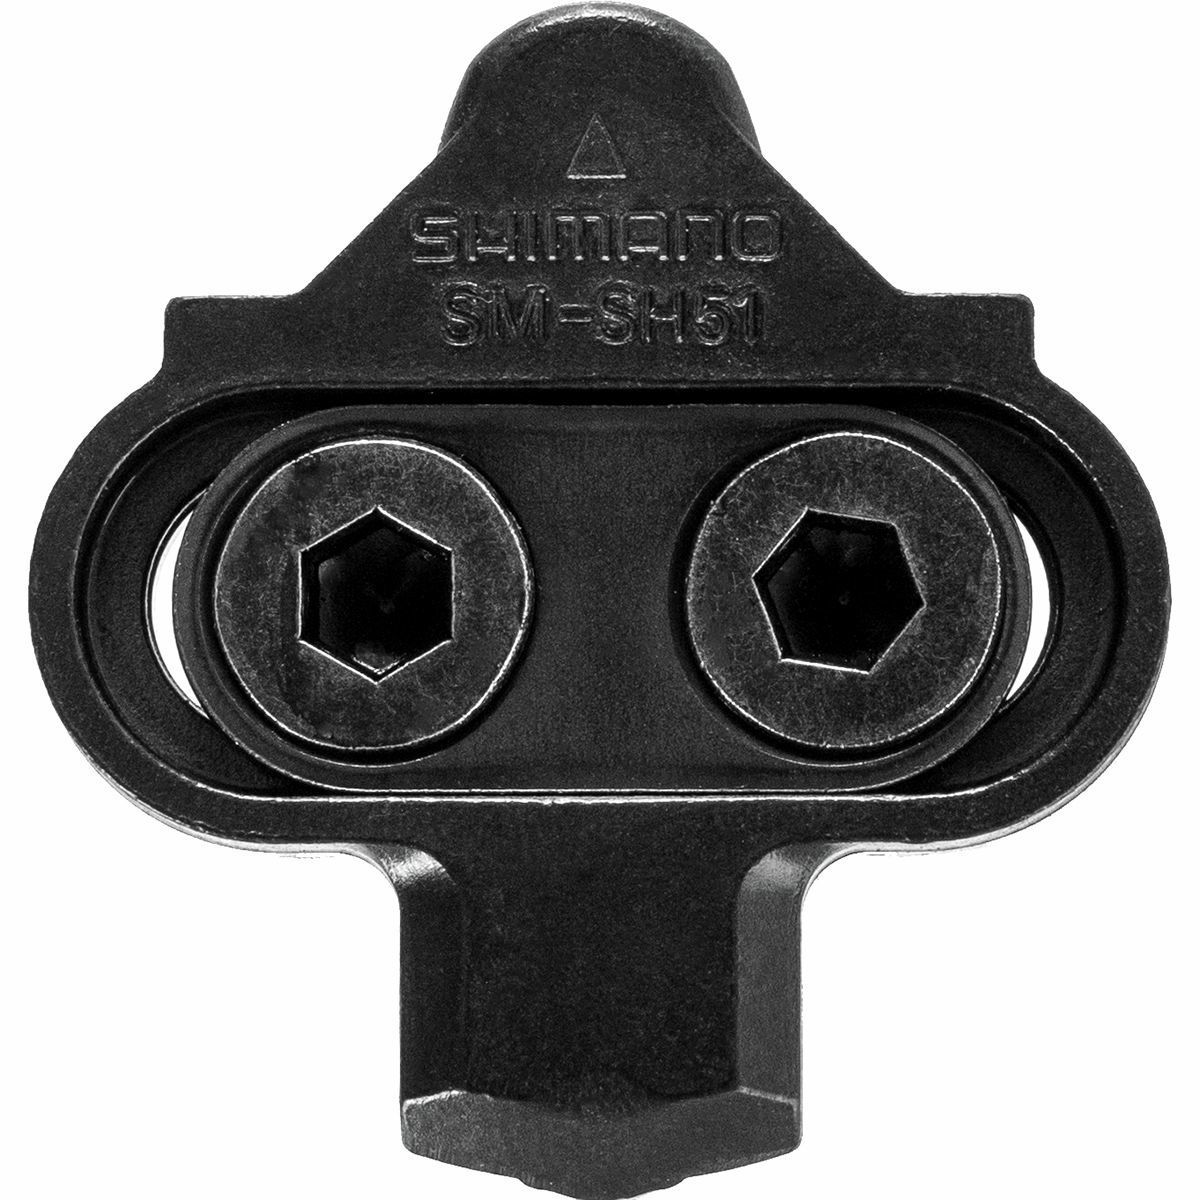 SPD Mountain Bike Clipless Pedal Cleats Set for SH51 